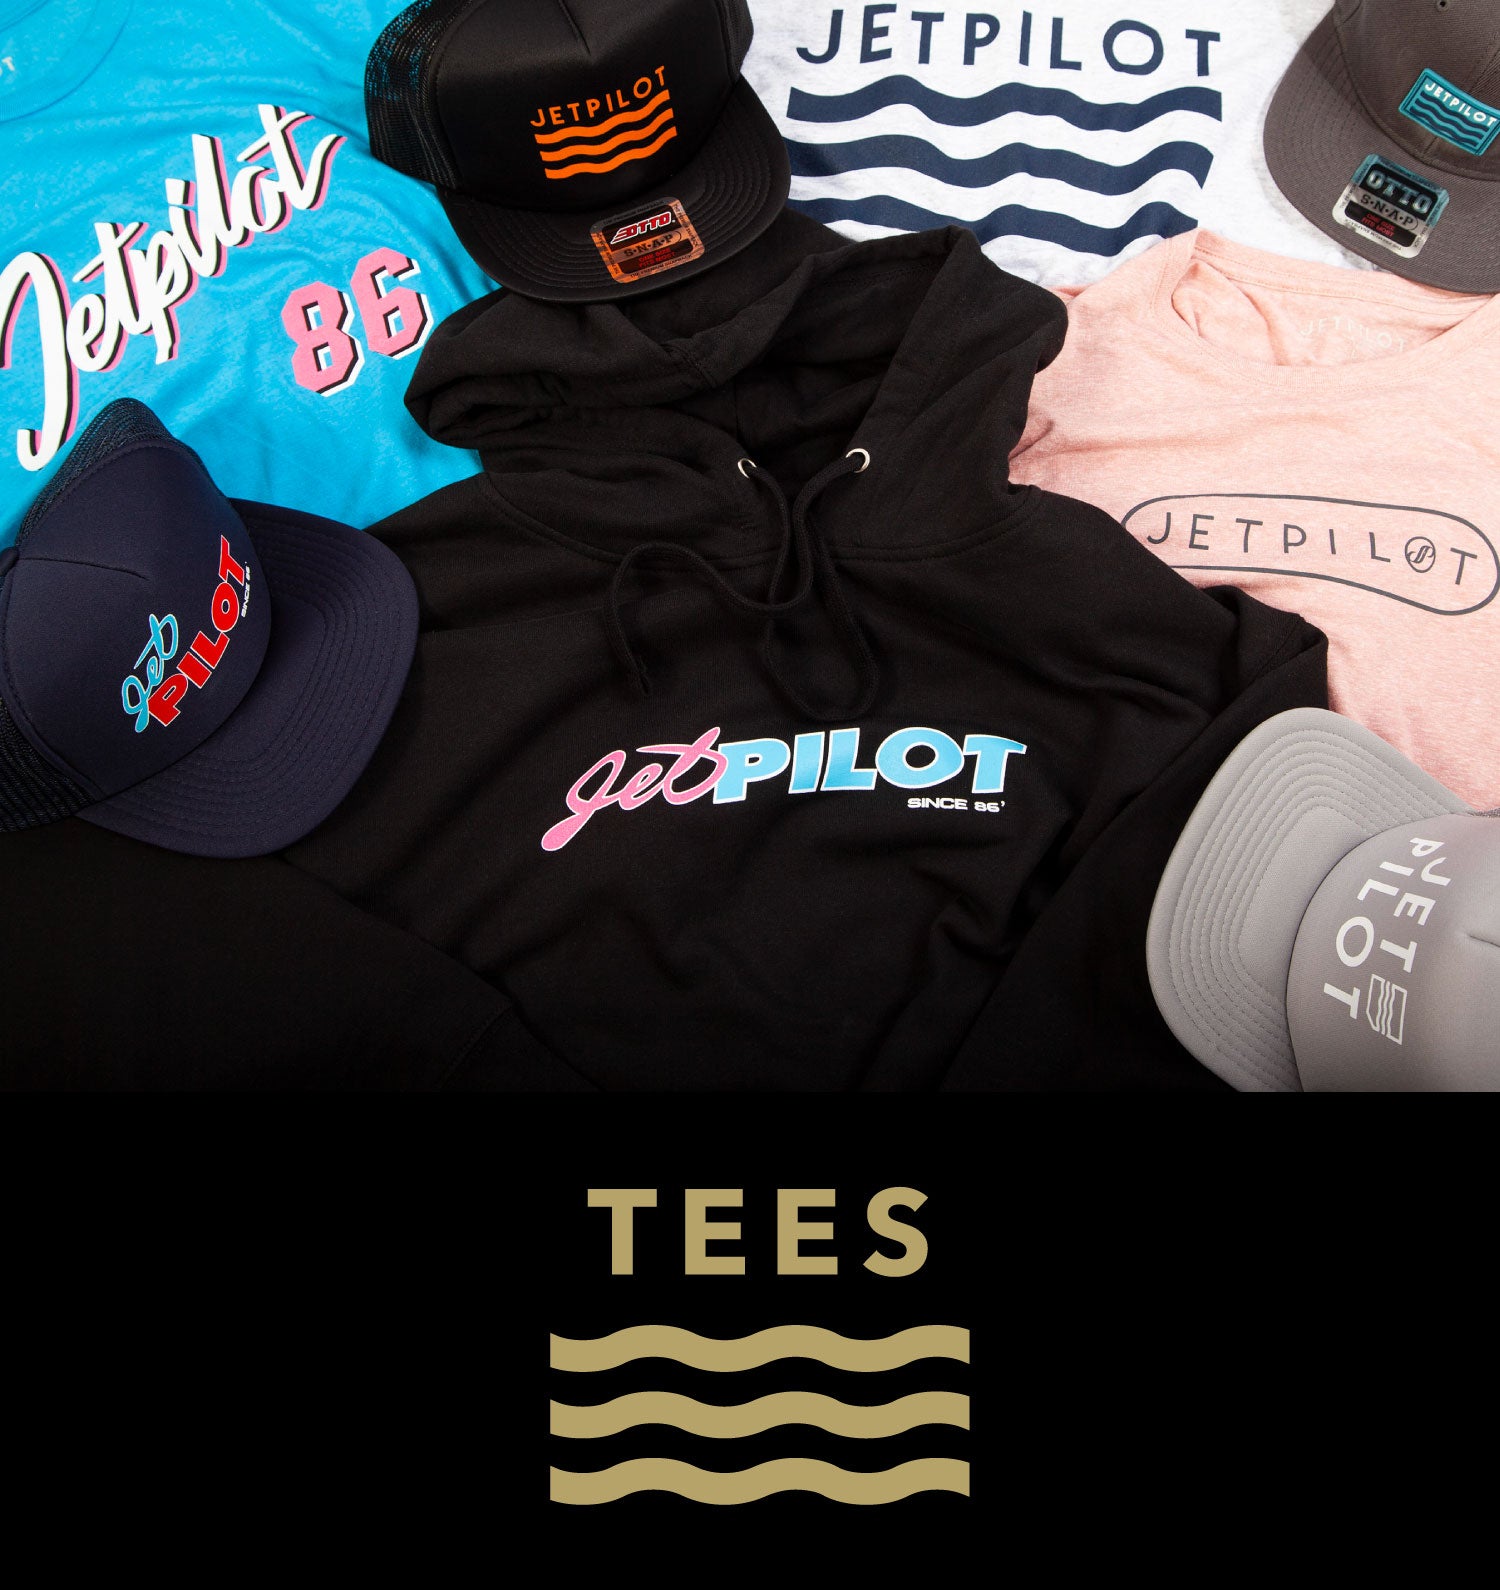 Jetpilot Tees collection.